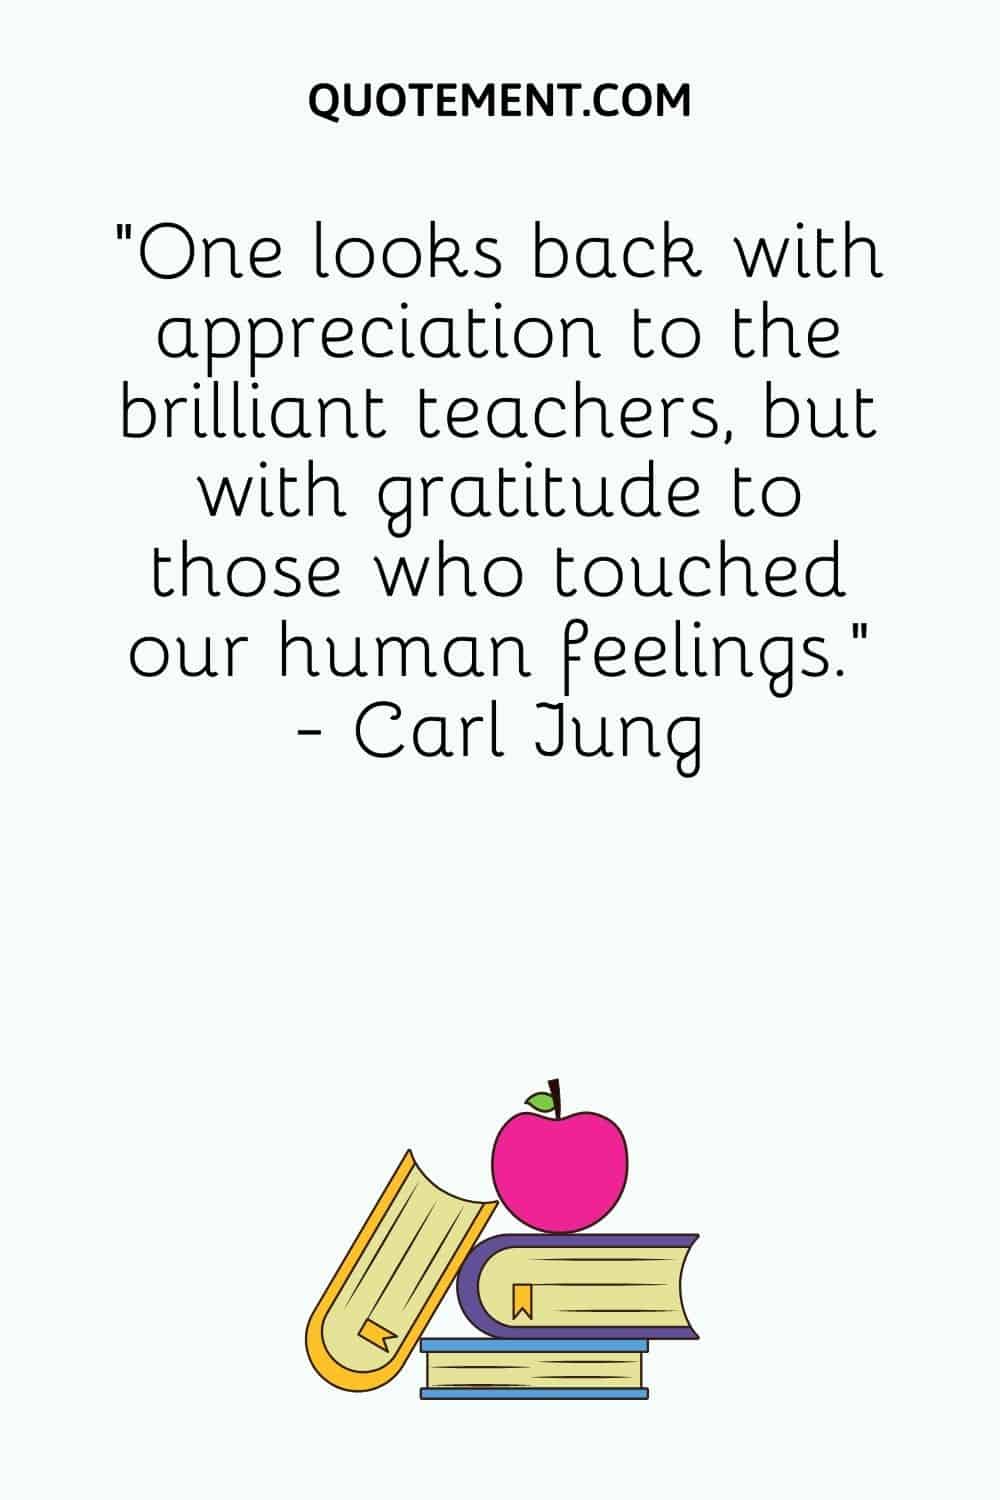 One looks back with appreciation to the brilliant teachers